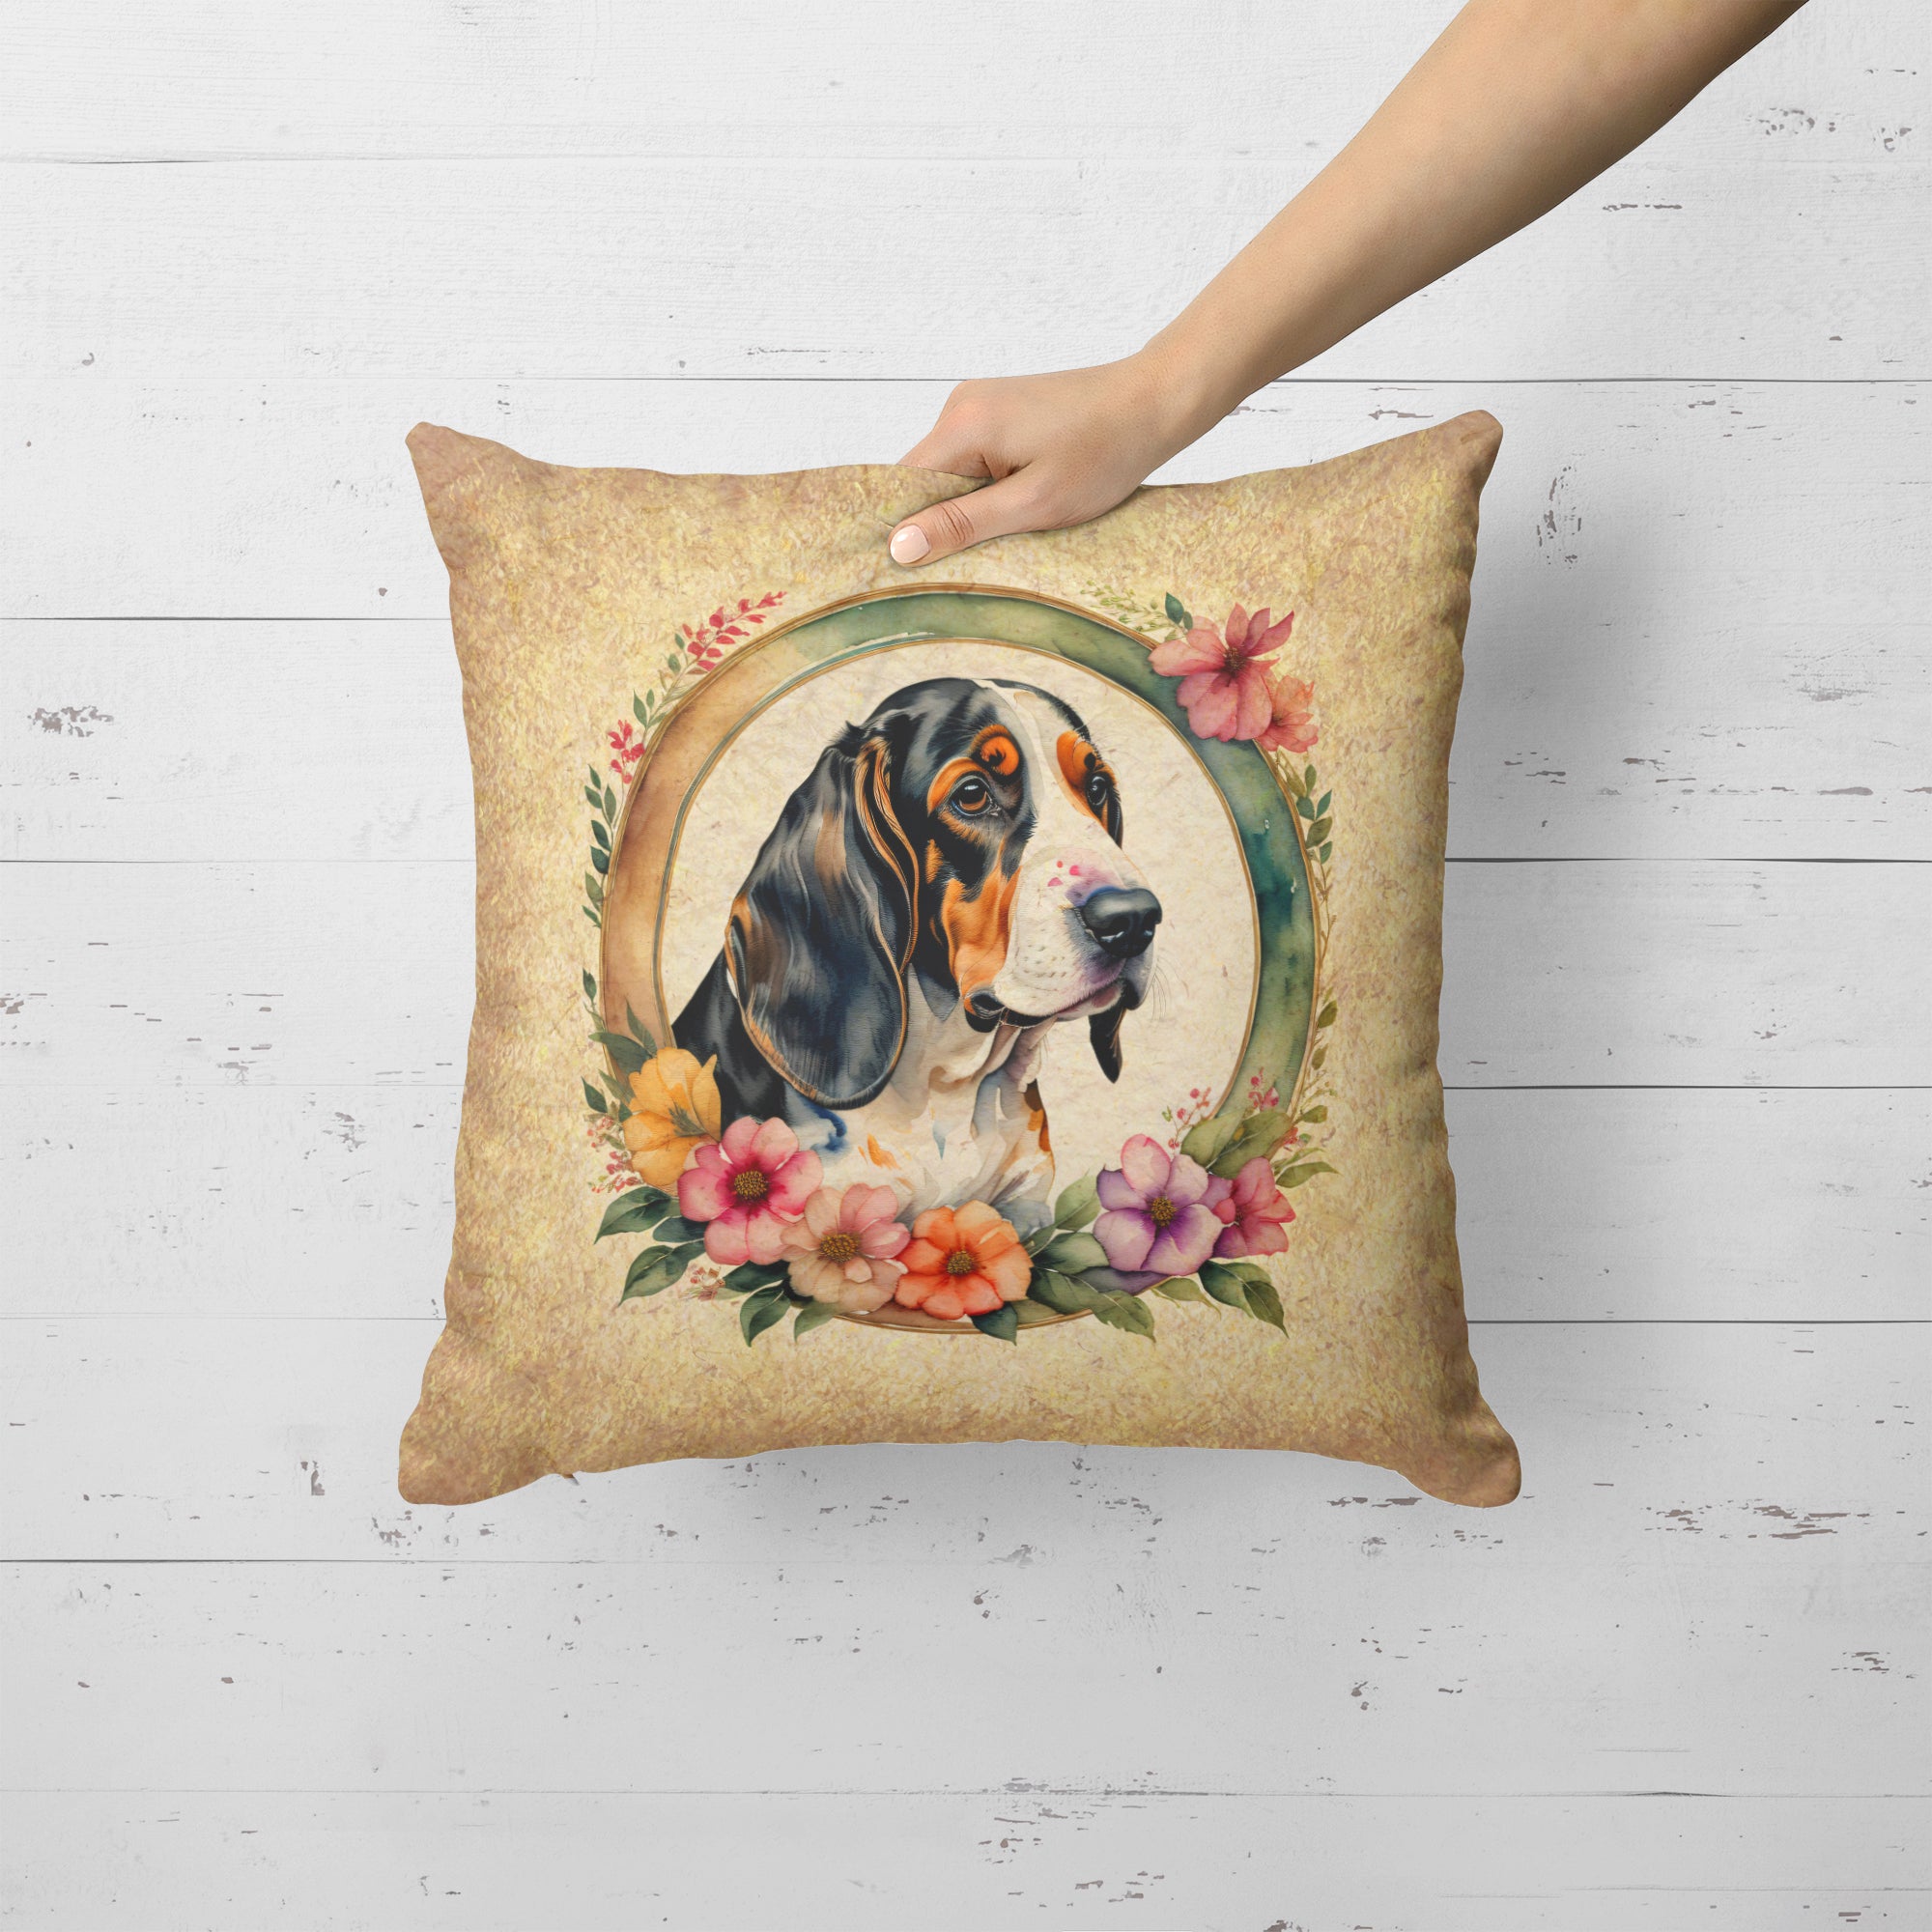 Buy this Basset Hound and Flowers Fabric Decorative Pillow